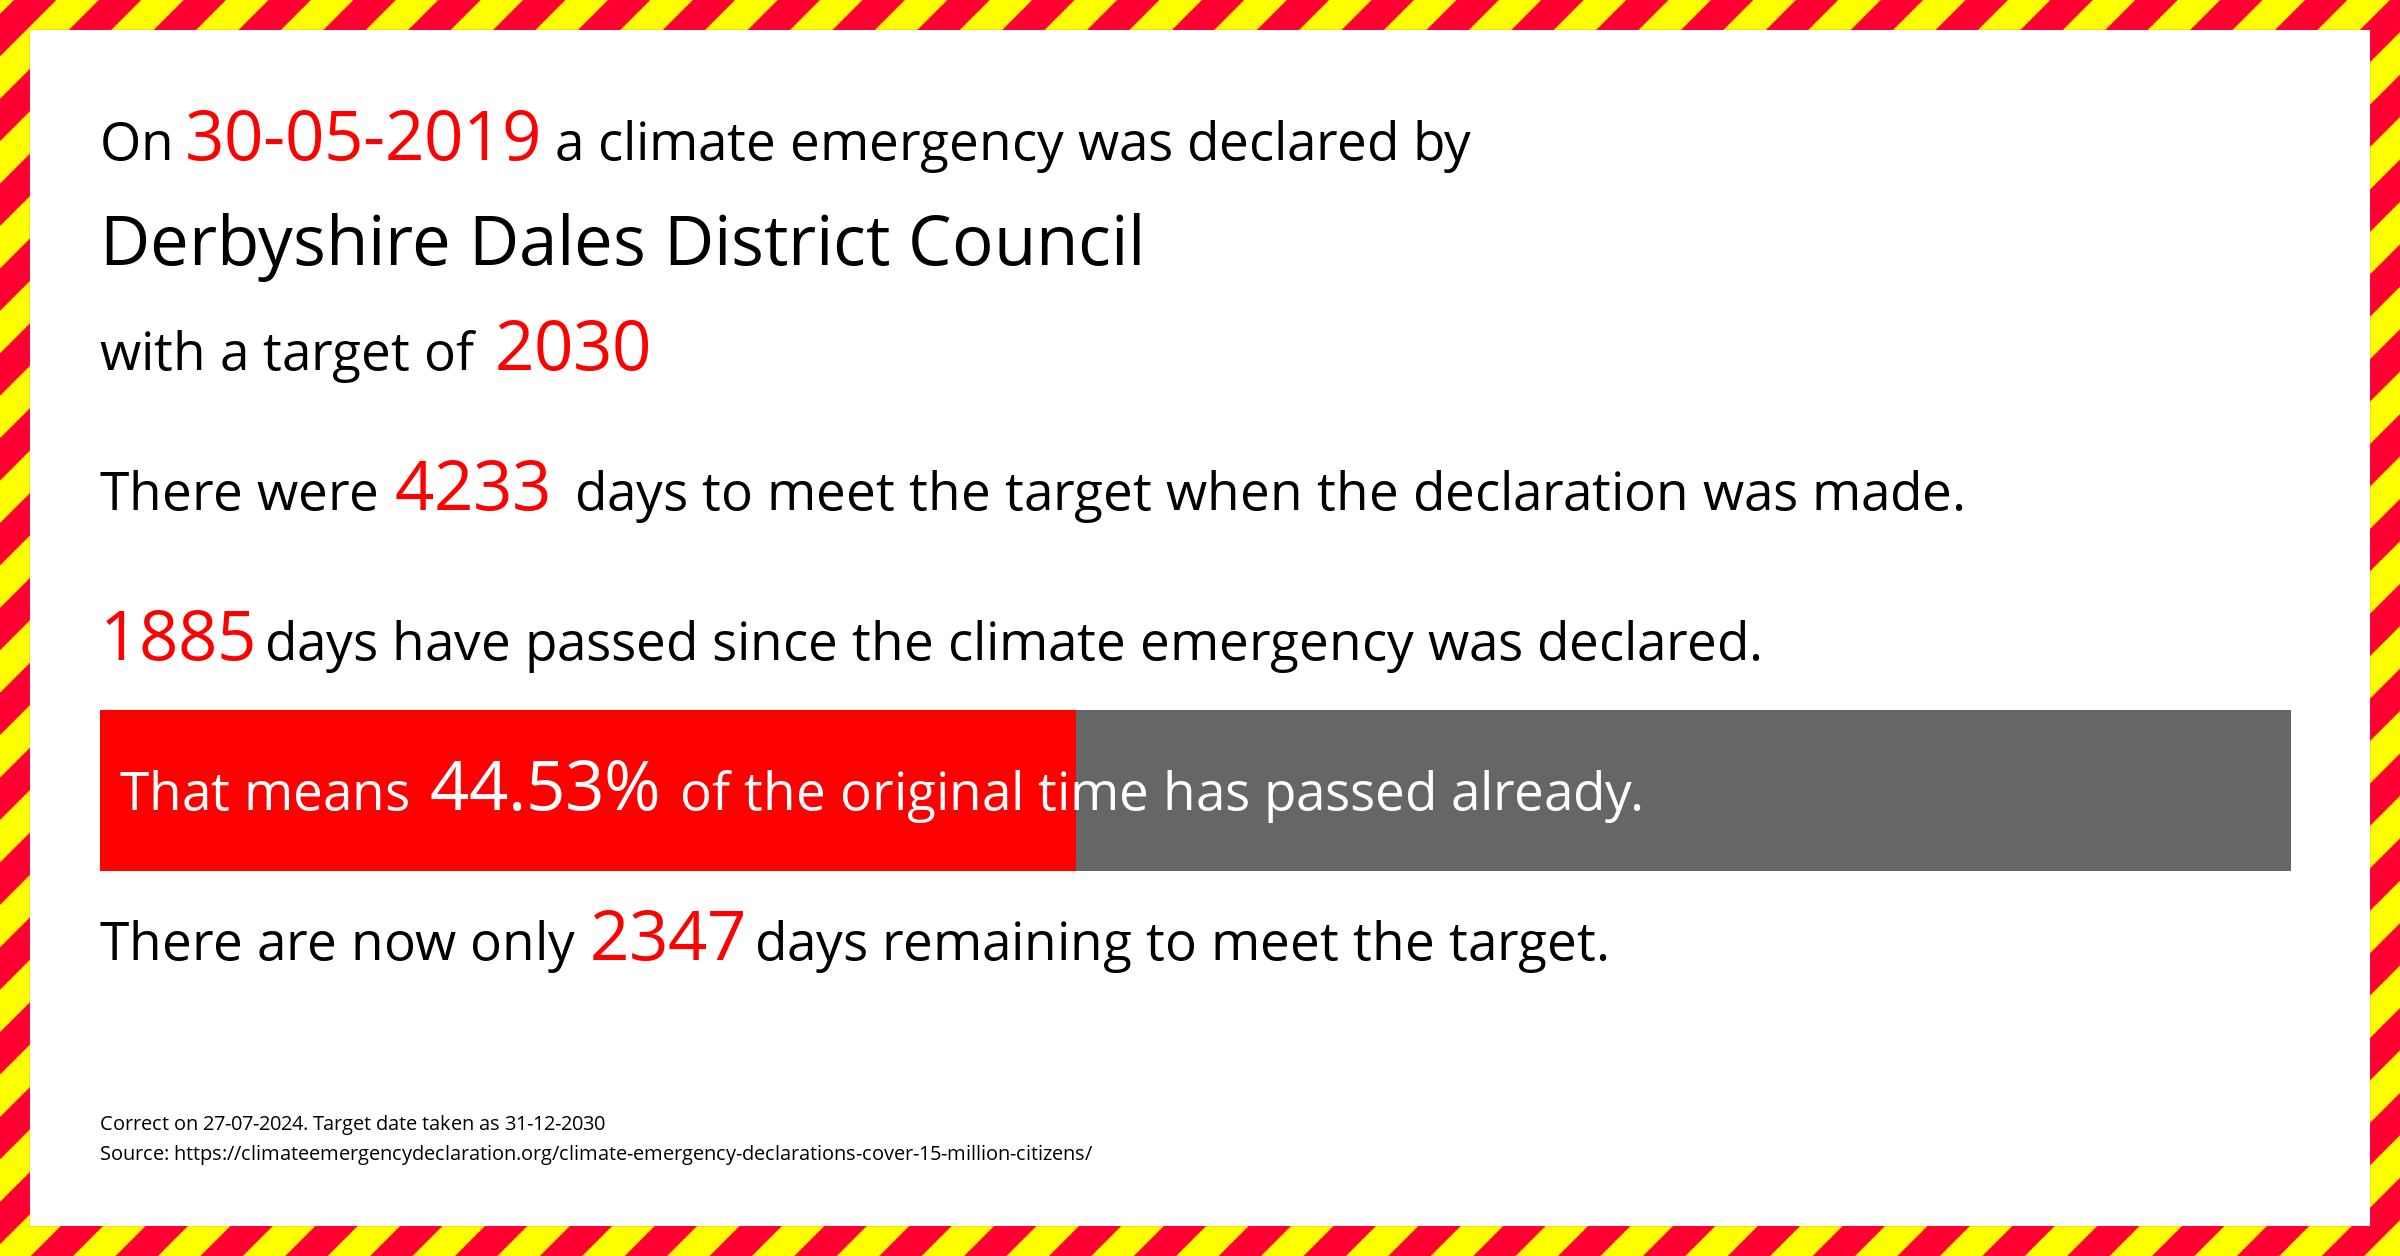 Derbyshire Dales District Council declared a Climate emergency on Thursday 30th May 2019, with a target of 2030.